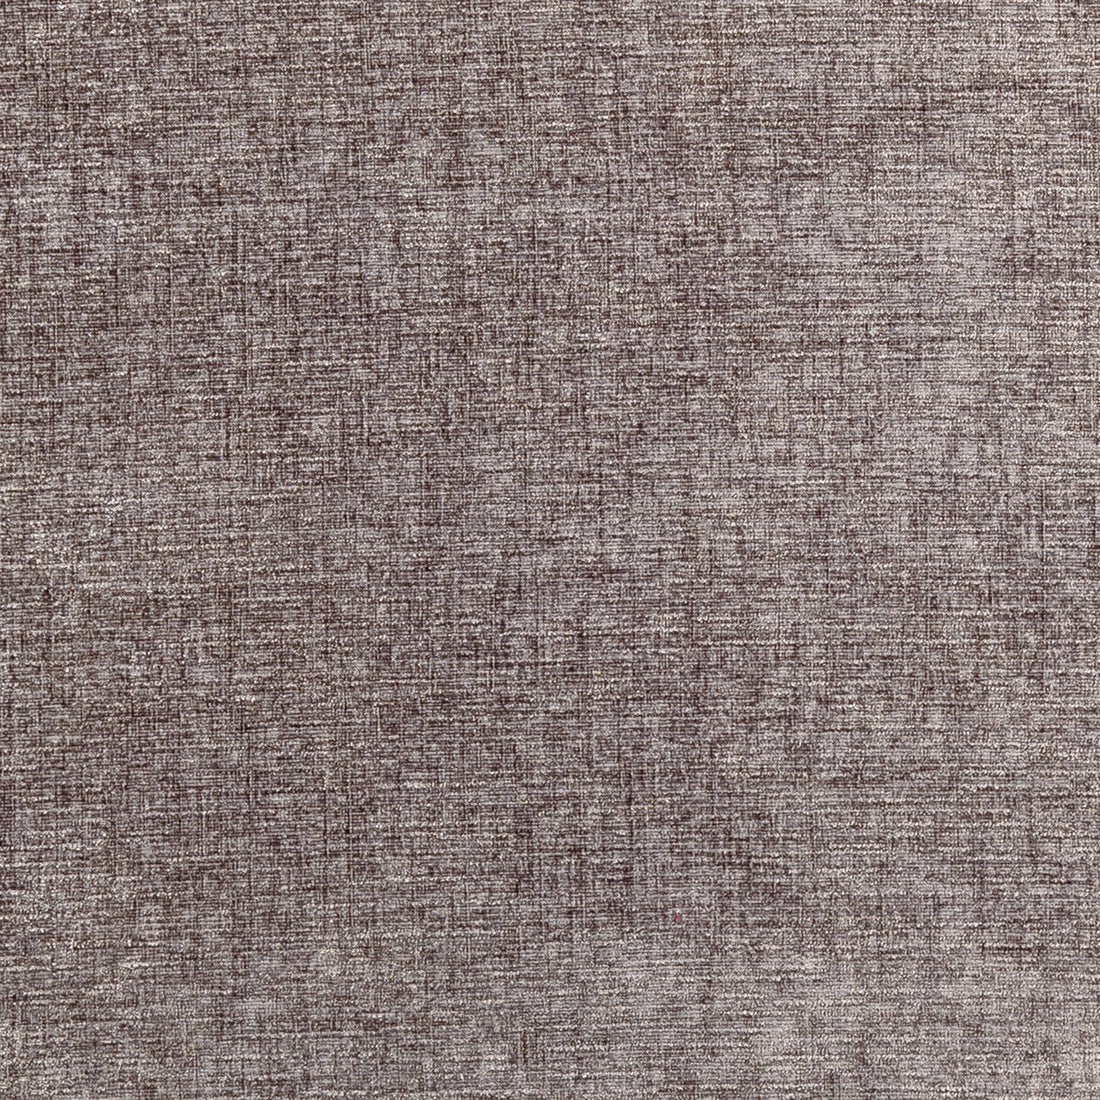 Karina fabric in steel color - pattern F0371/29.CAC.0 - by Clarke And Clarke in the Clarke &amp; Clarke Karina collection